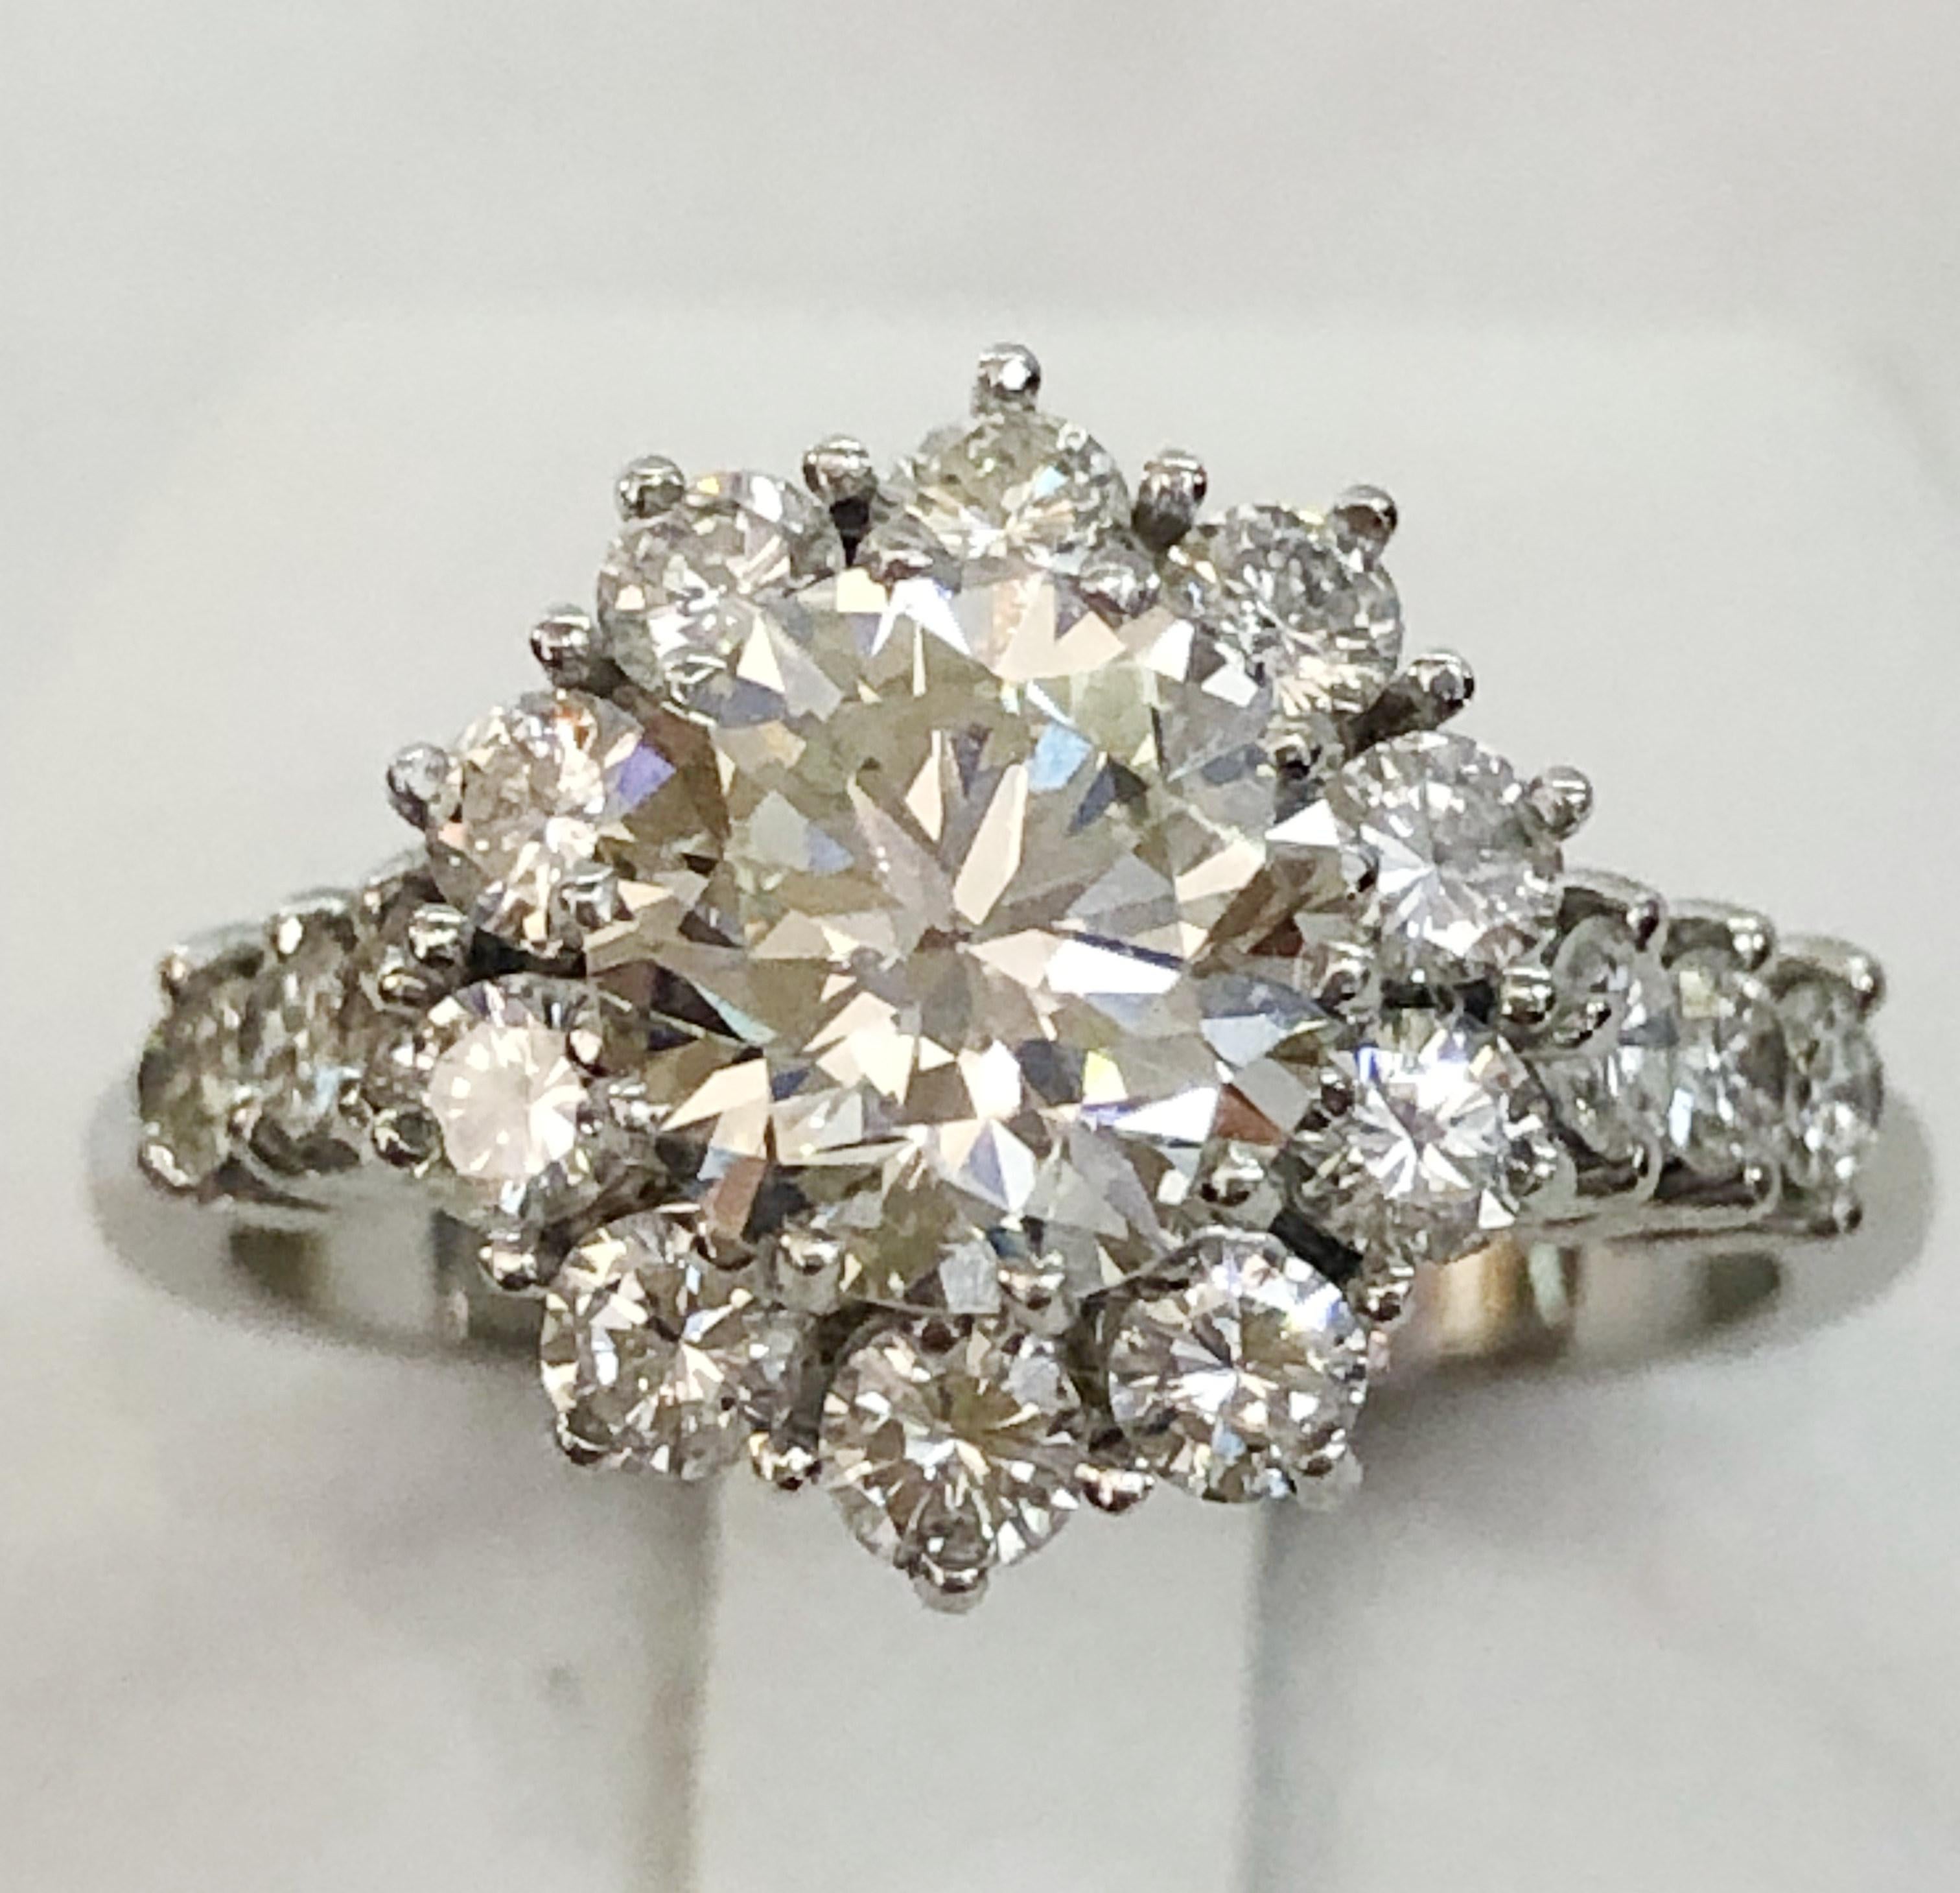 18 karat white gold daisy ring with 0.8 karats of brilliant diamonds on the stem and a large central diamond of 1.3 karats, Italy 1950-1960s
Ring size US 6.75